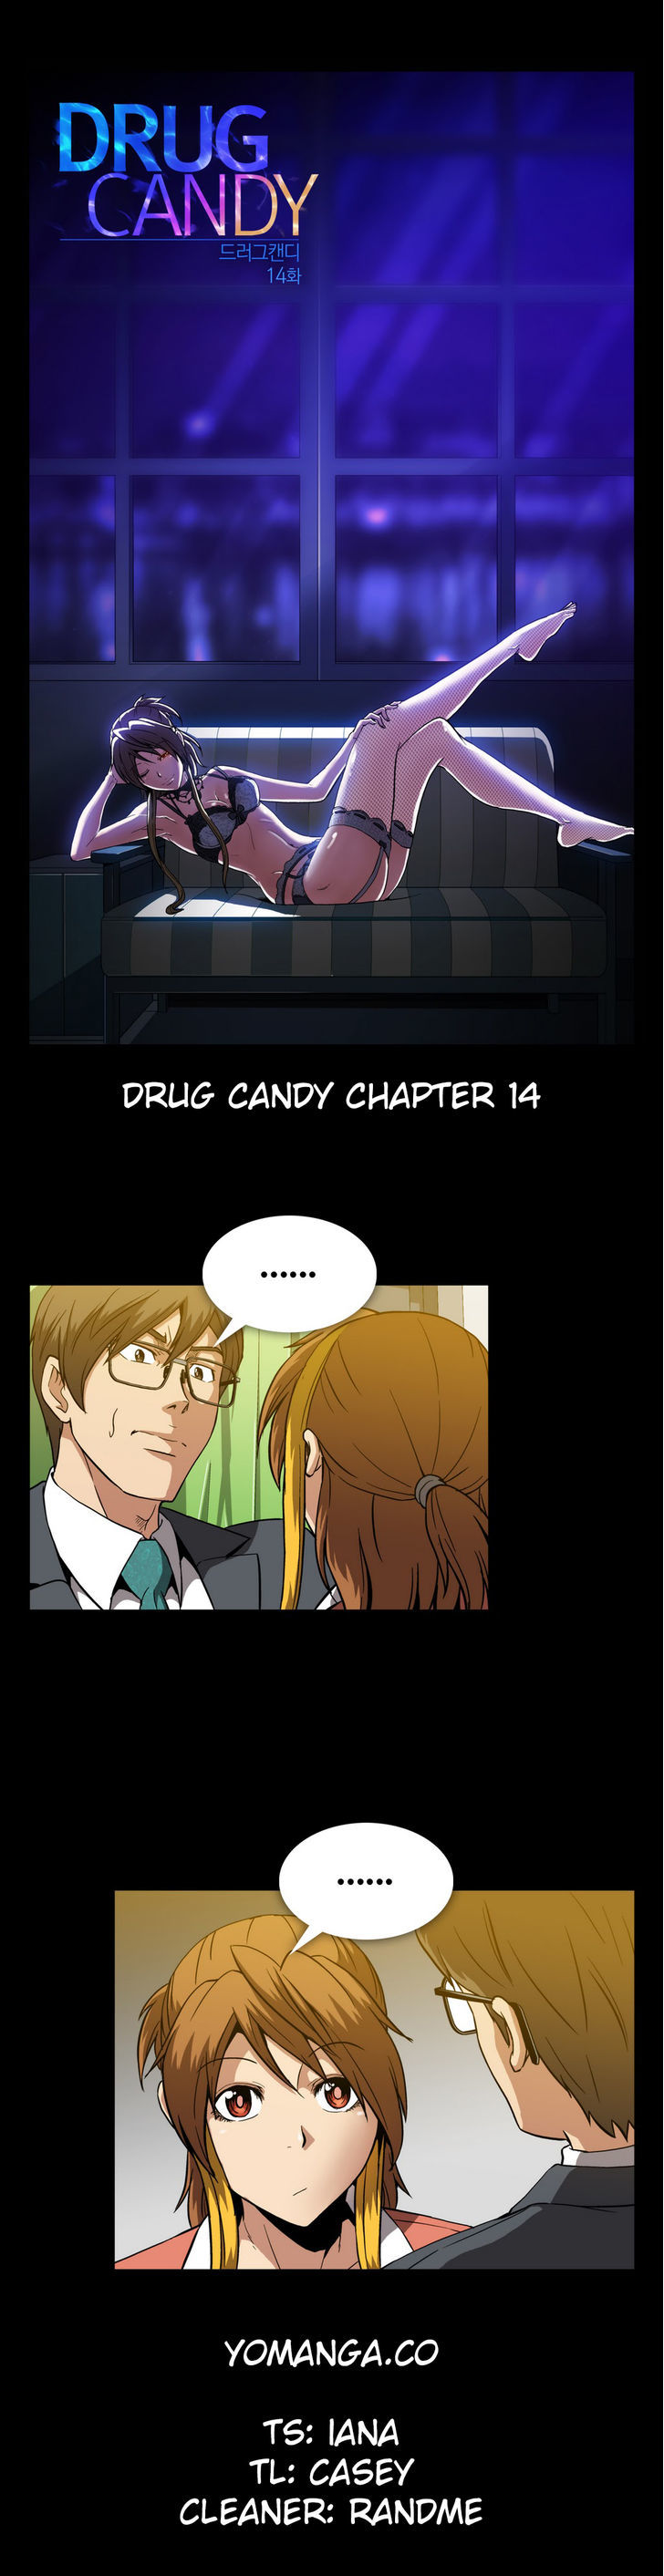 Drug Candy - Chapter 14 Page 1